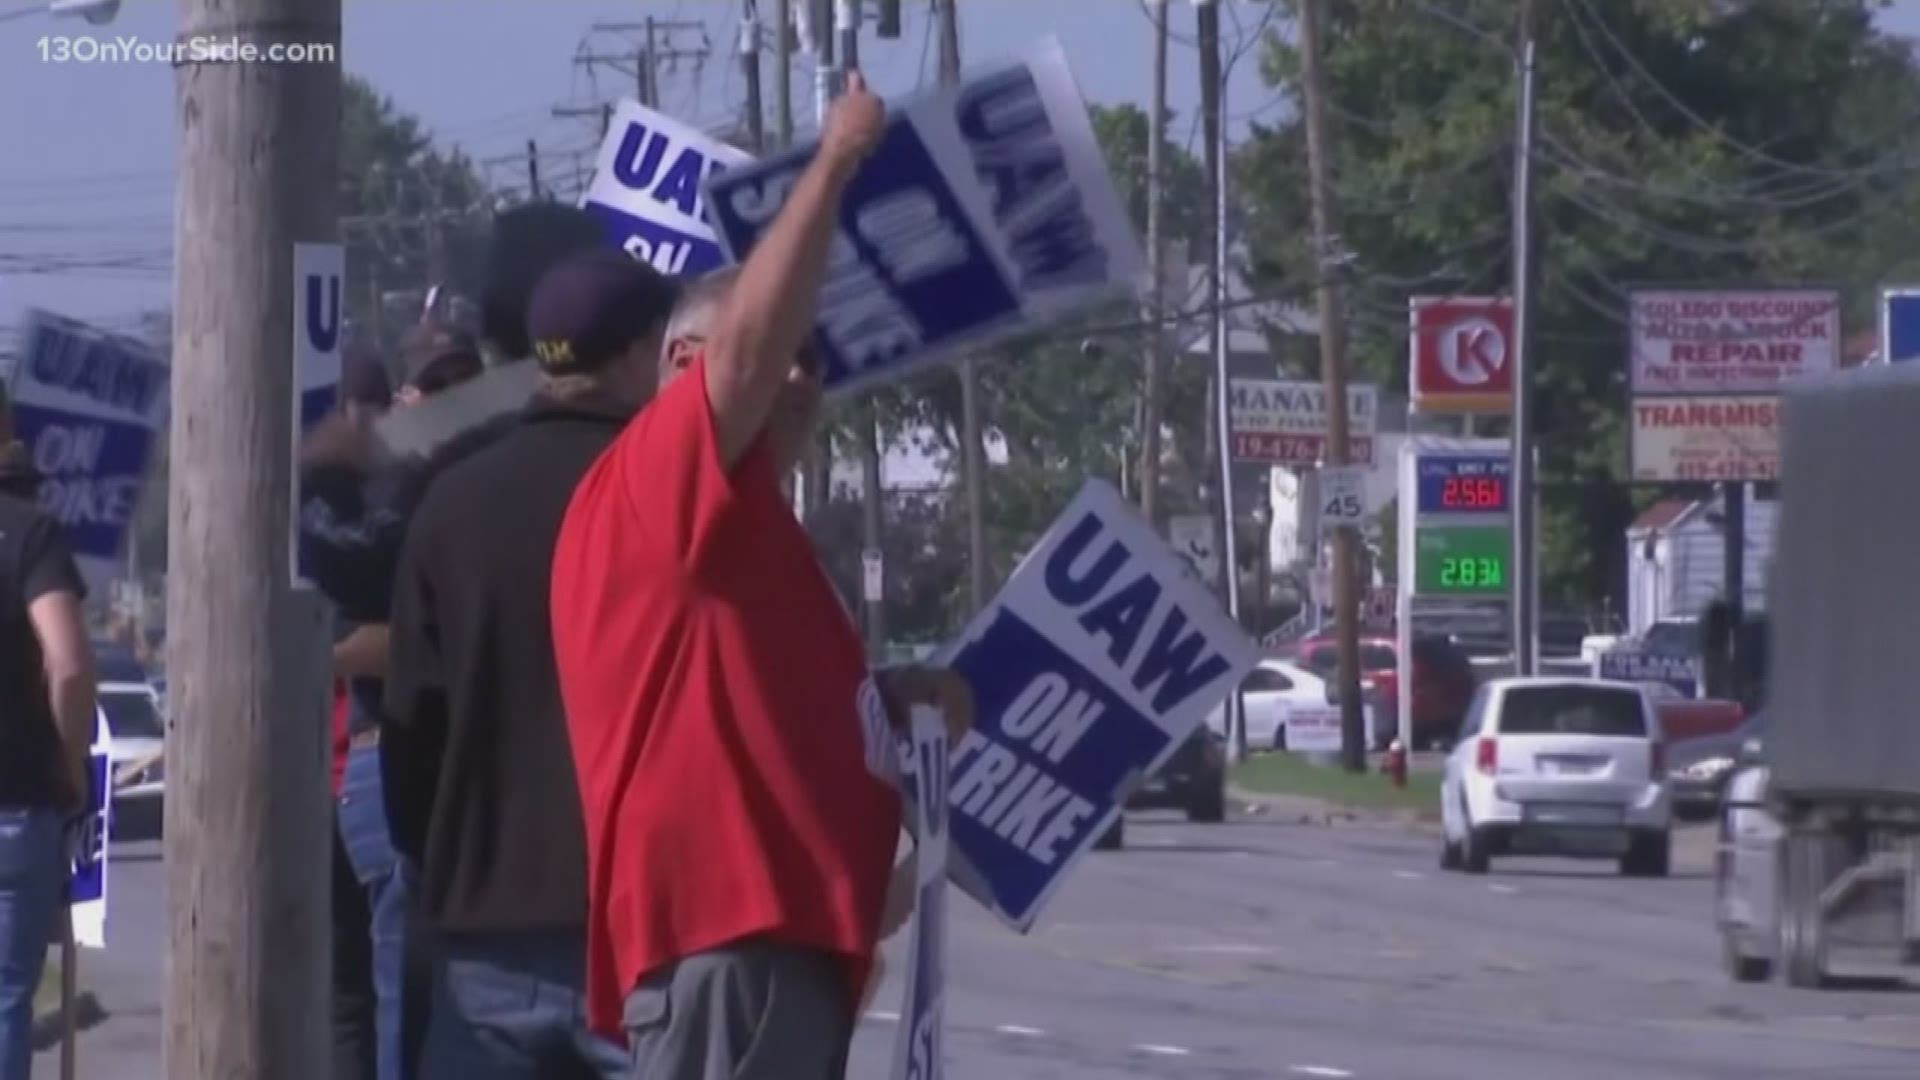 After a month on the picket line, negotiators will return to the bargaining table Tuesday to try and button up a deal.